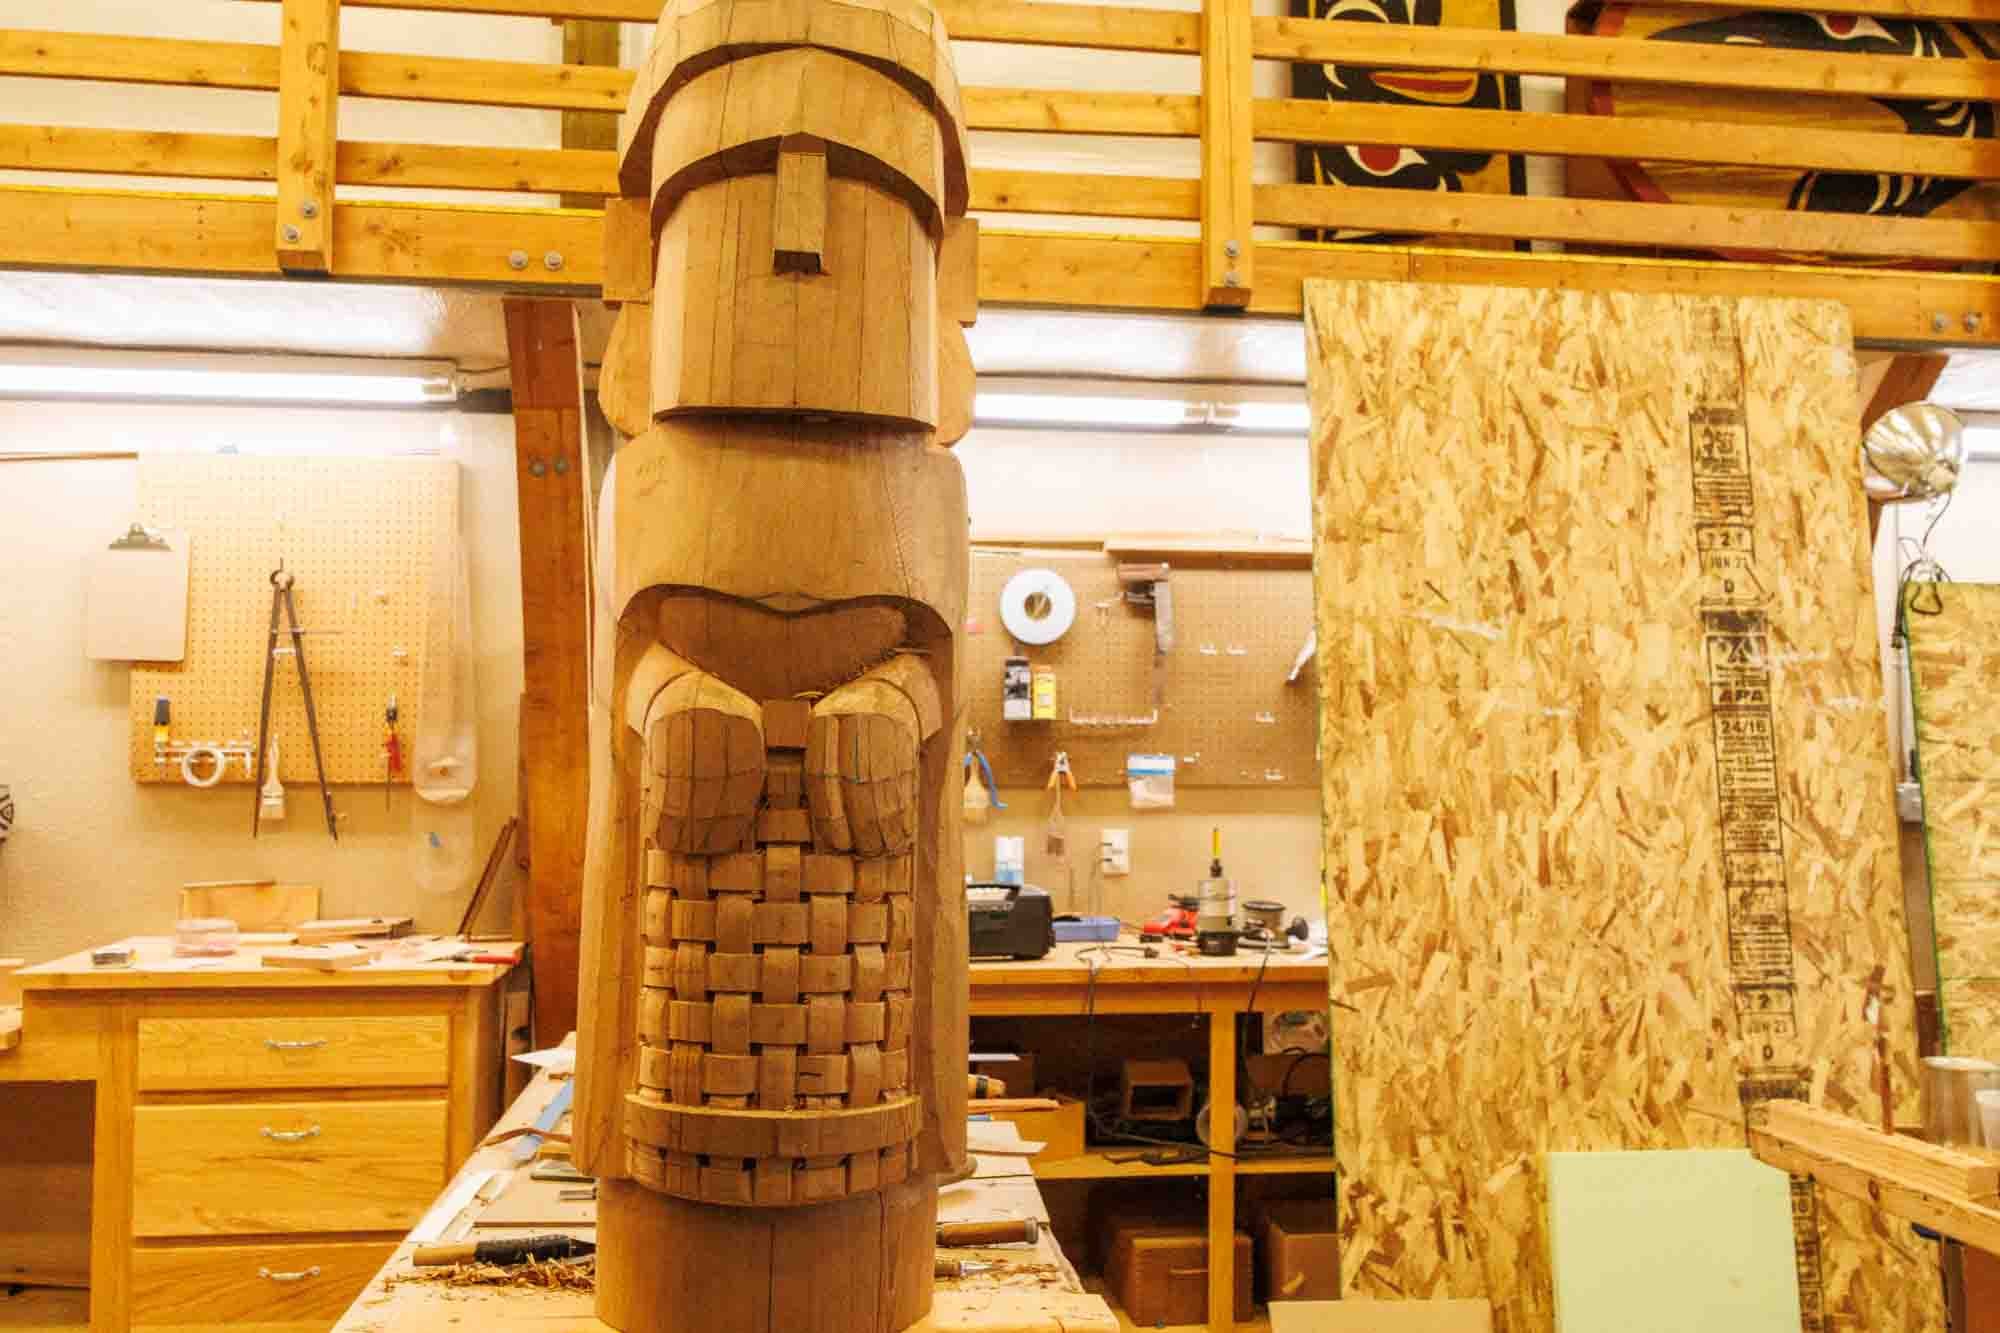 Partially finished totem pole